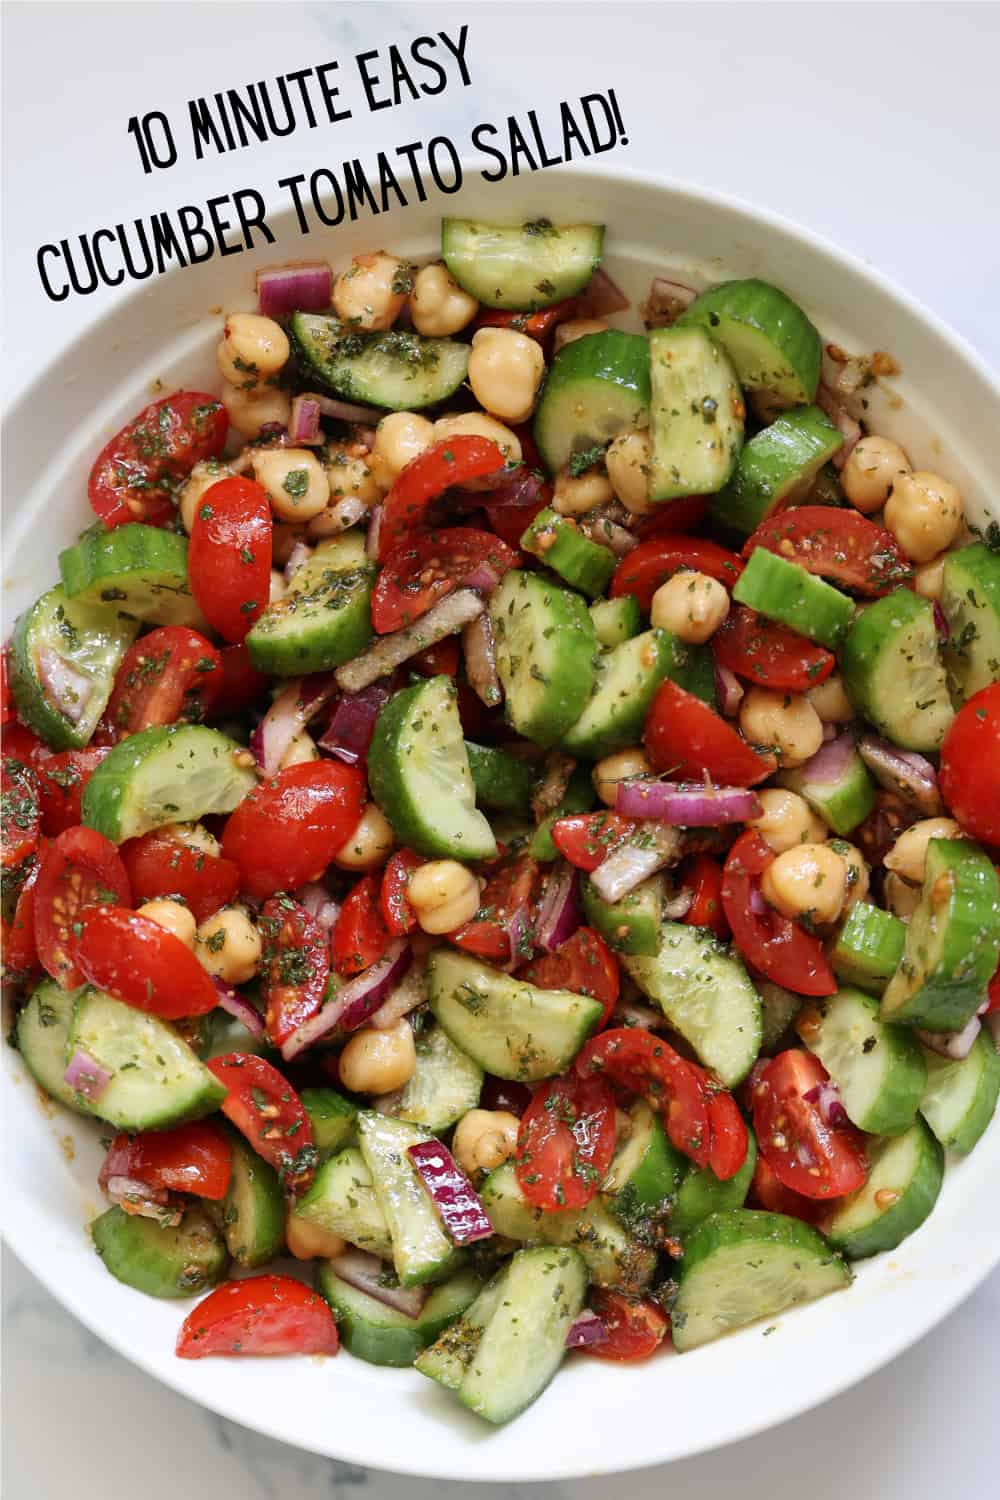 Cucumber Tomato Salad with Balsamic Parsley Dressing